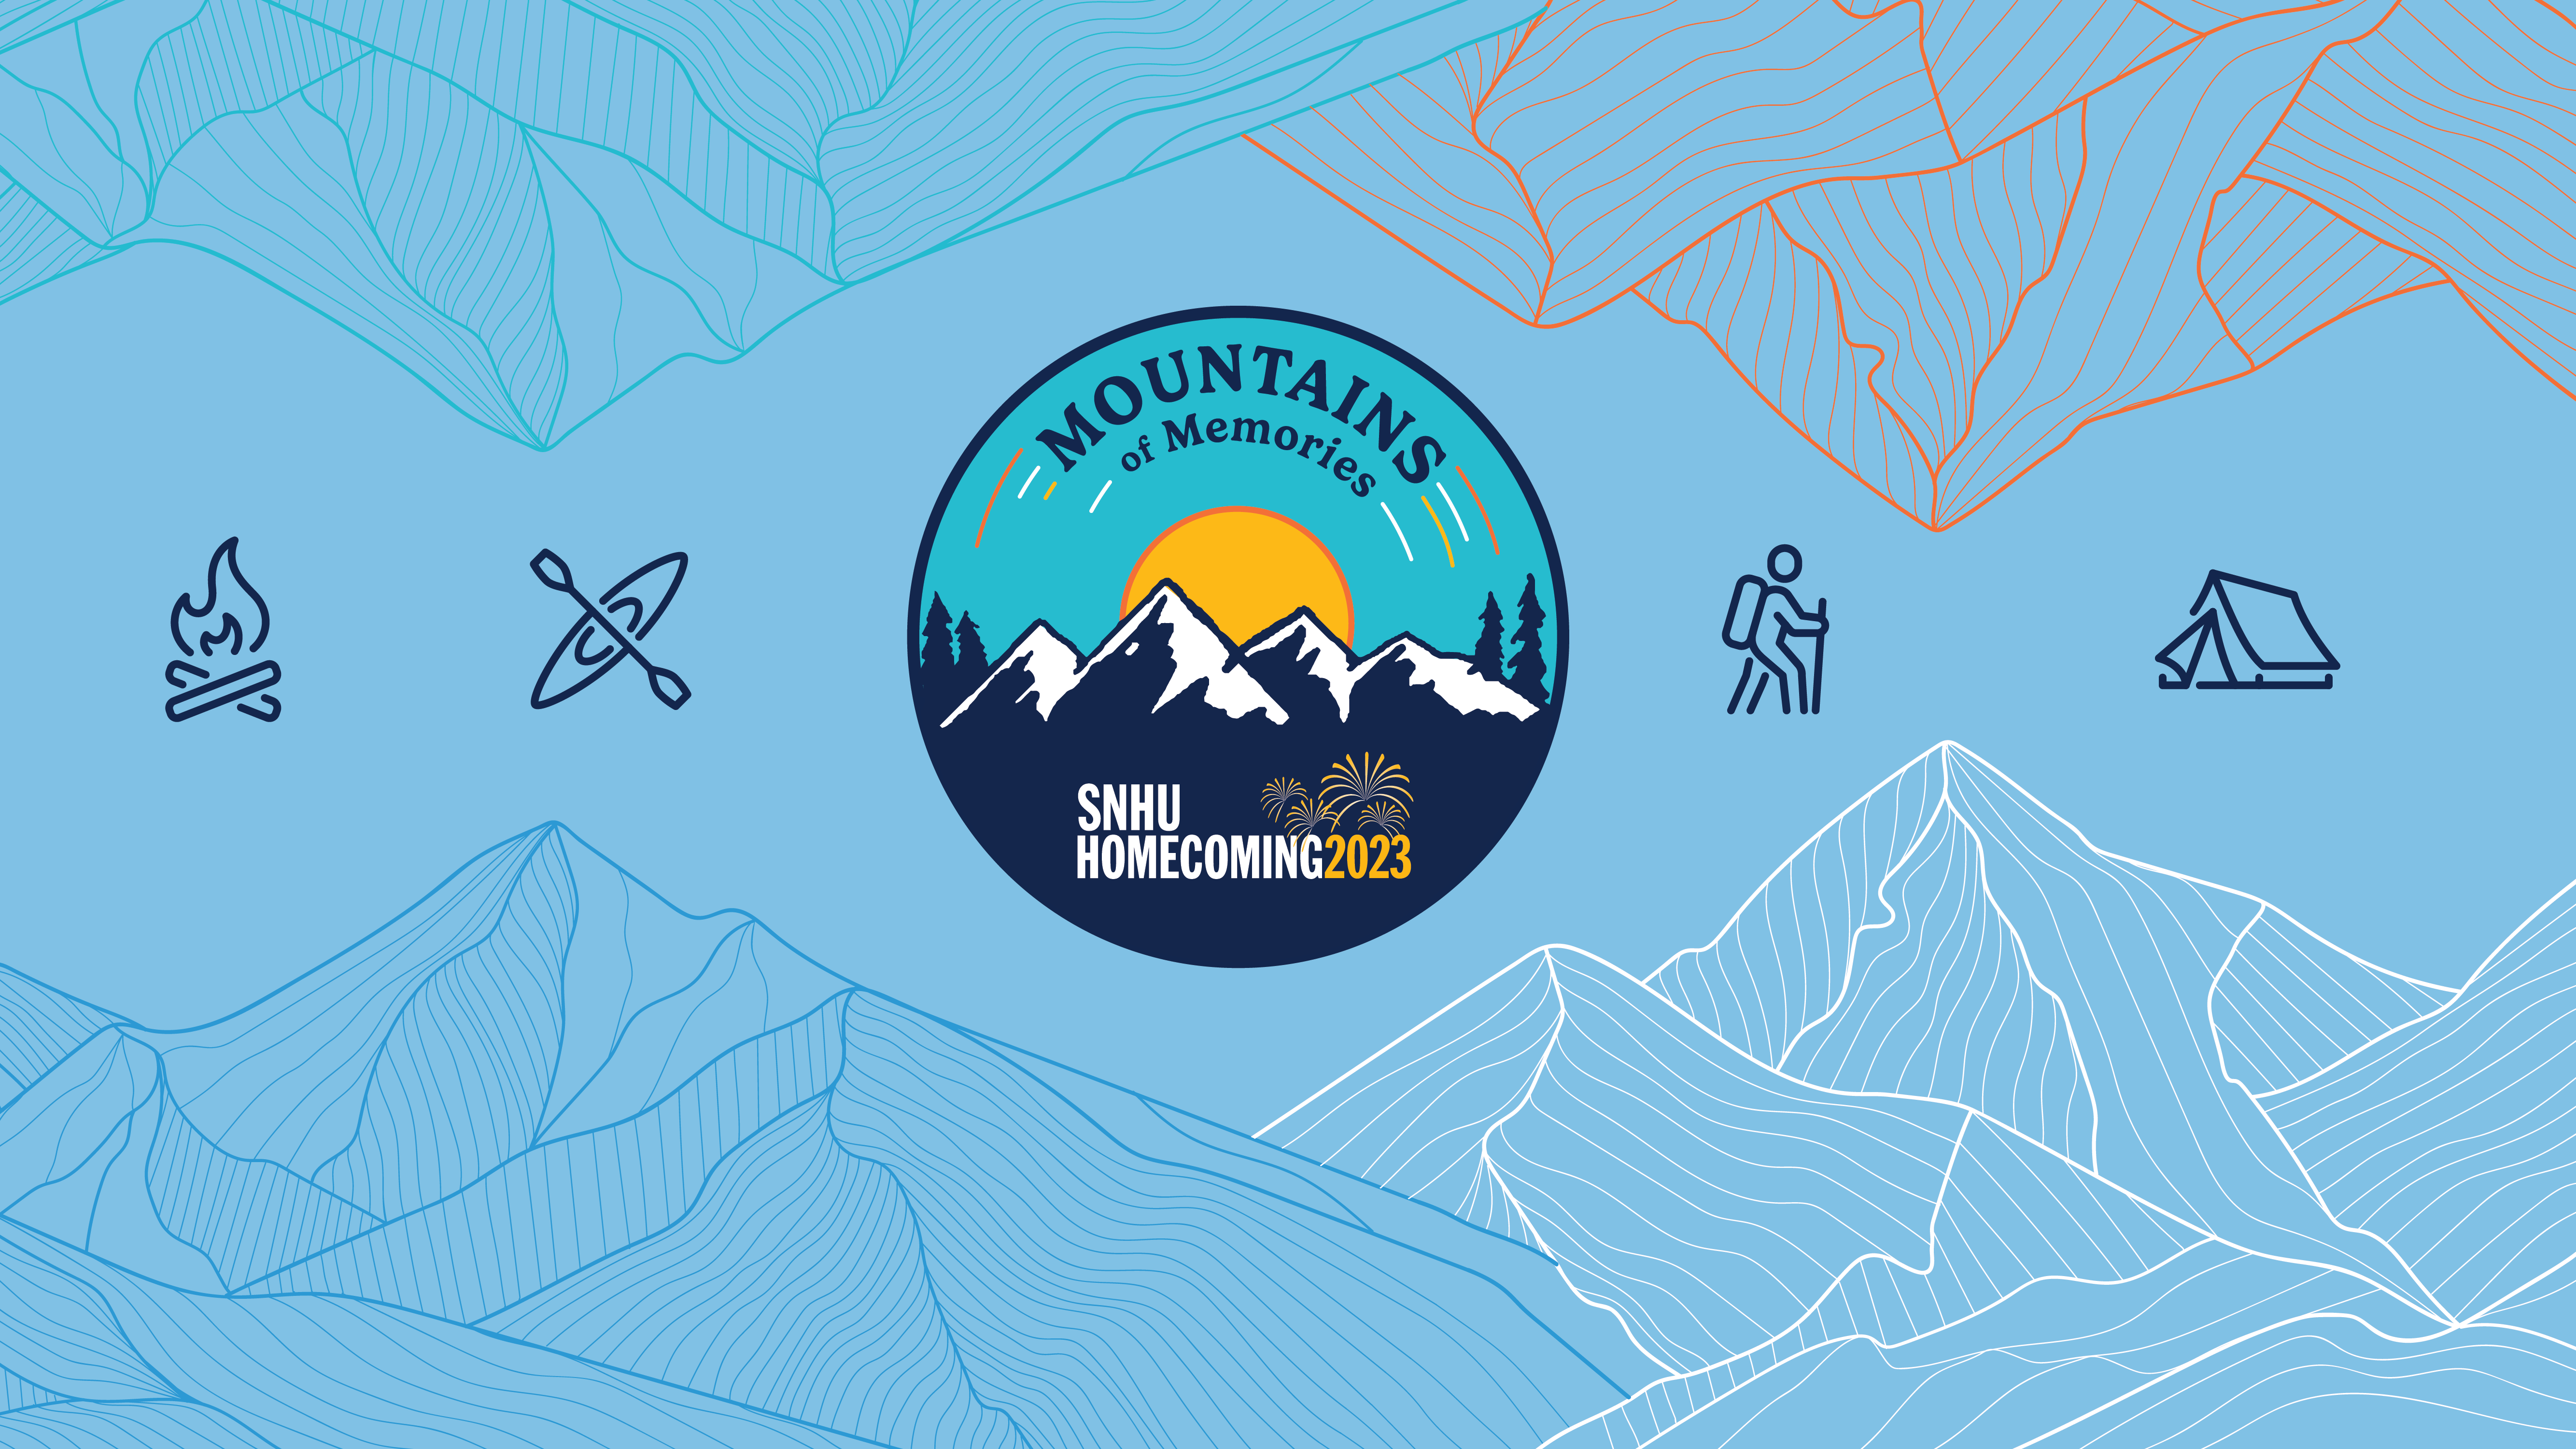 Sun setting over mountainous horizon with text over sun saying "Mountains of Memories". Mountain silhouette reads "SNHU Homecoming 2023" with fireworks over 2023. Icons of outdoor activities and topographical style map background.